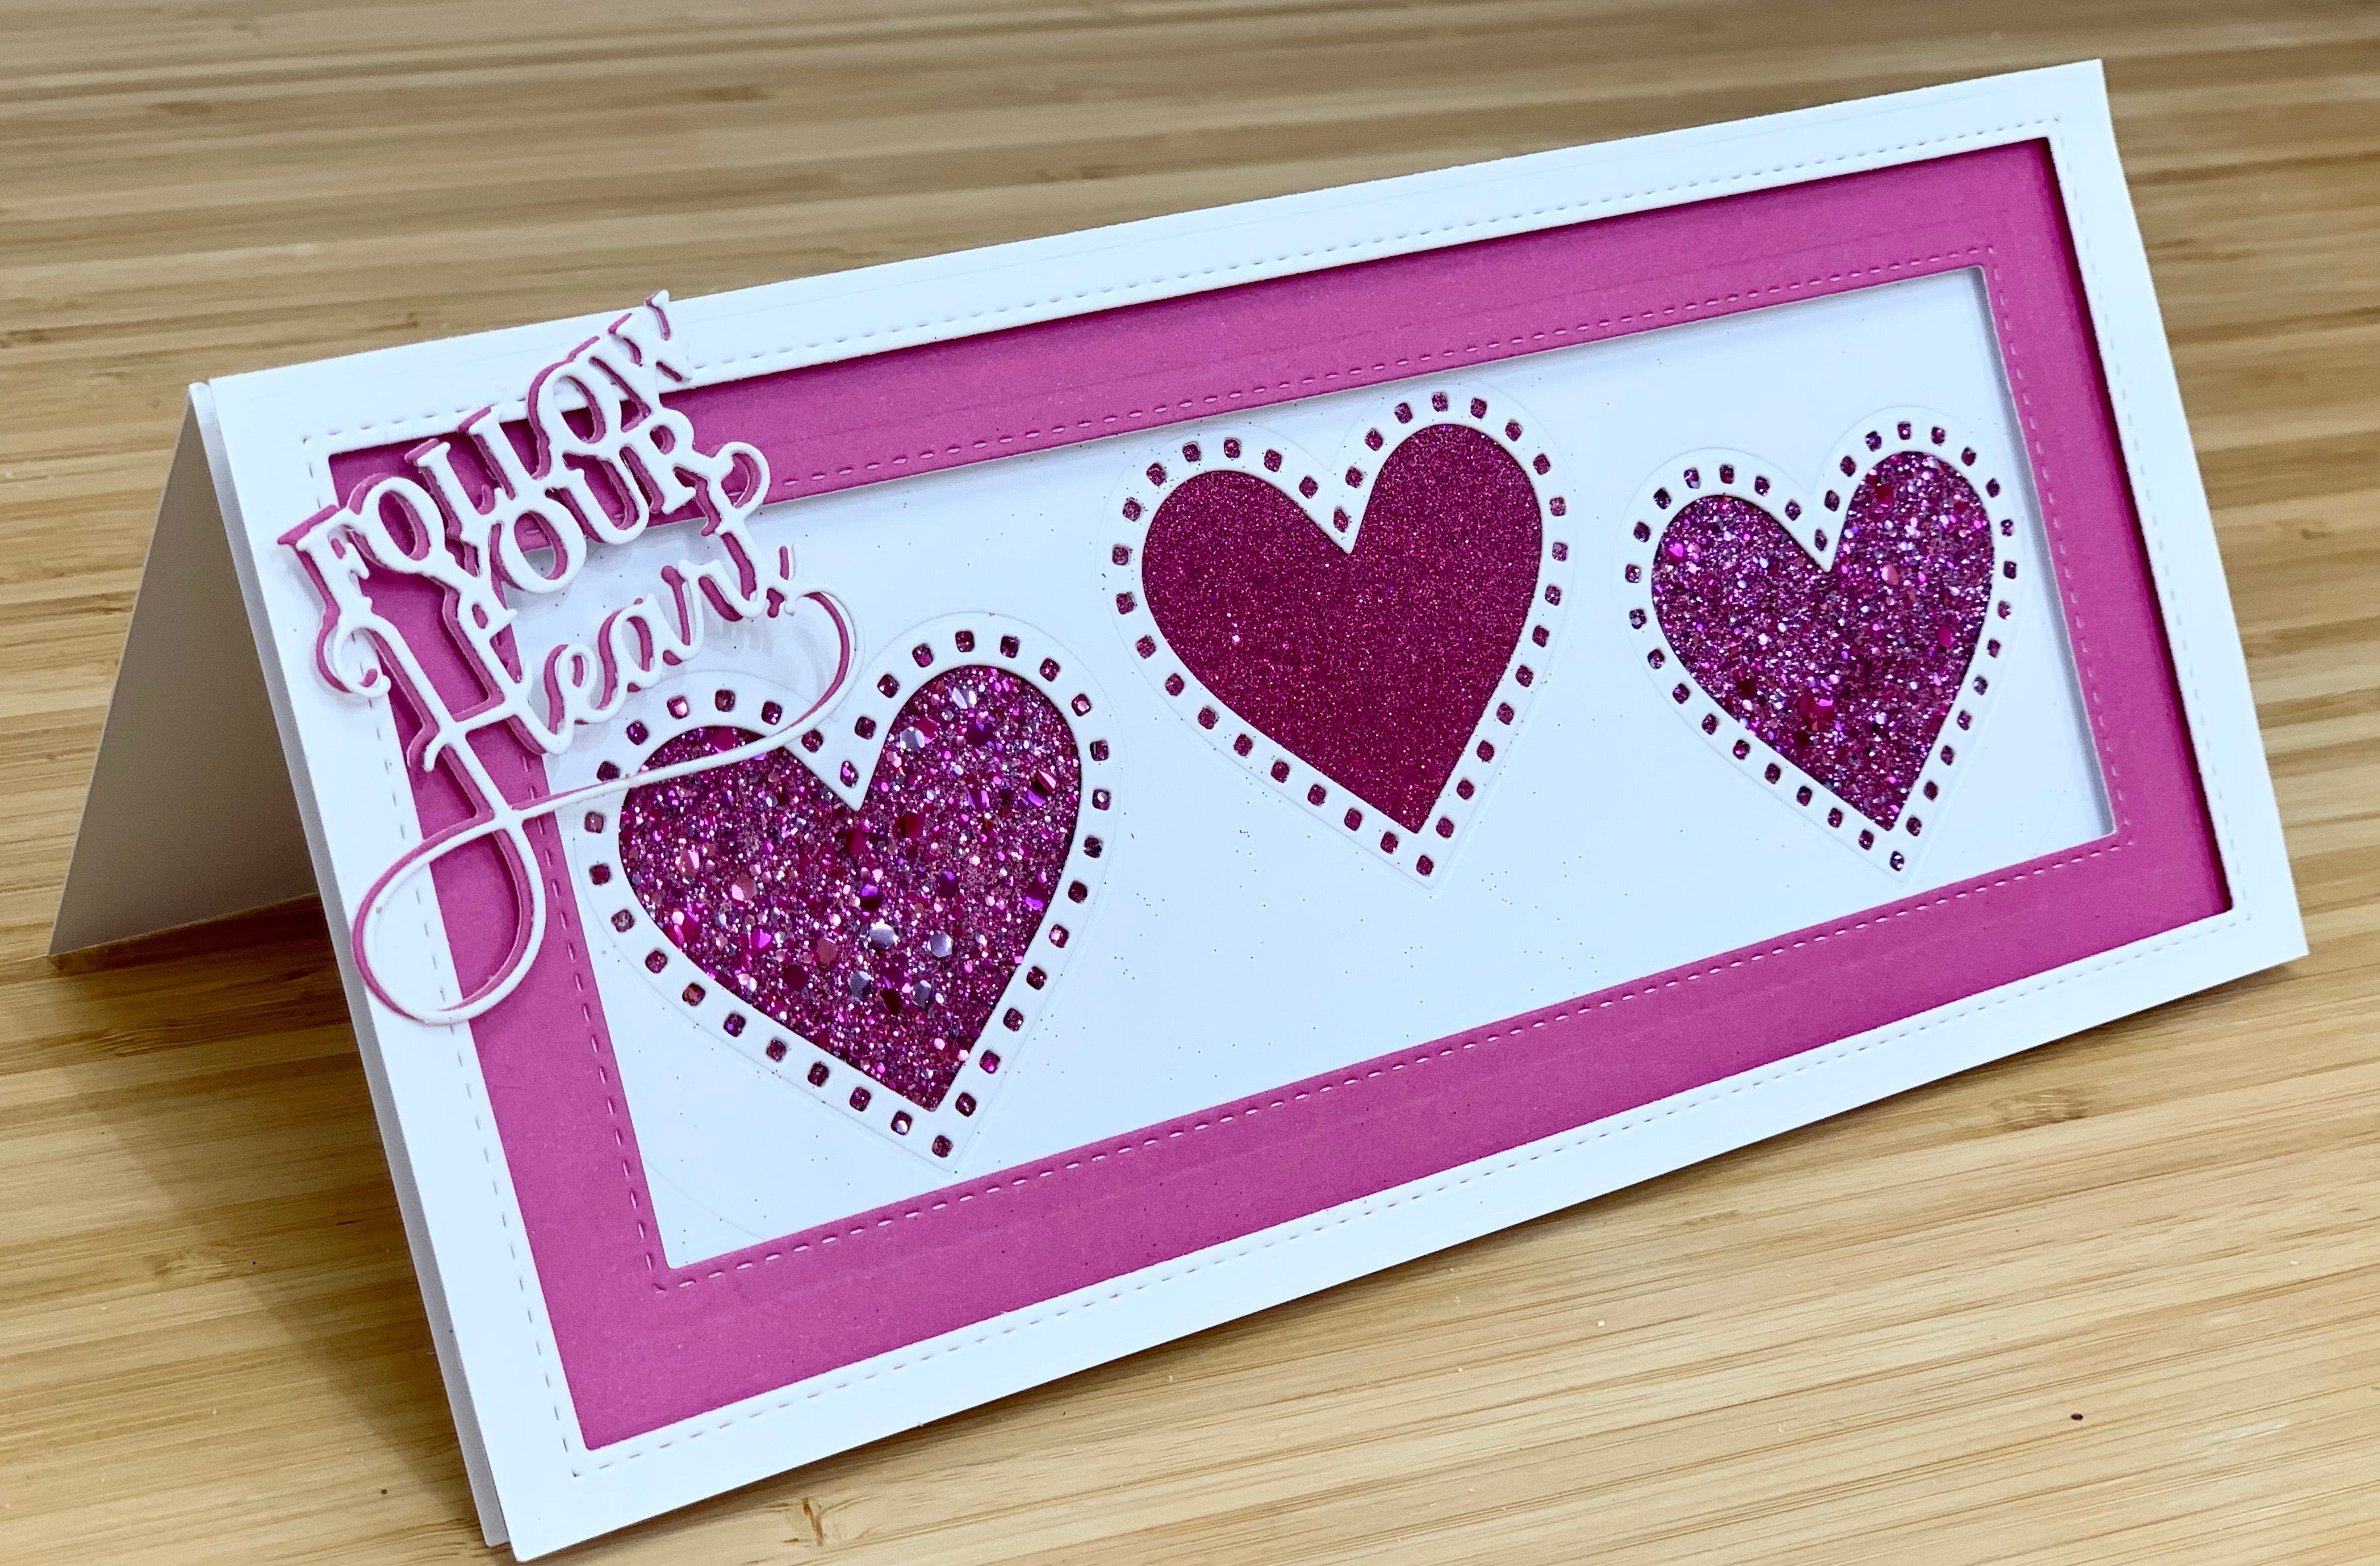 Creative Expressions Glitter Heart Card - January 20th